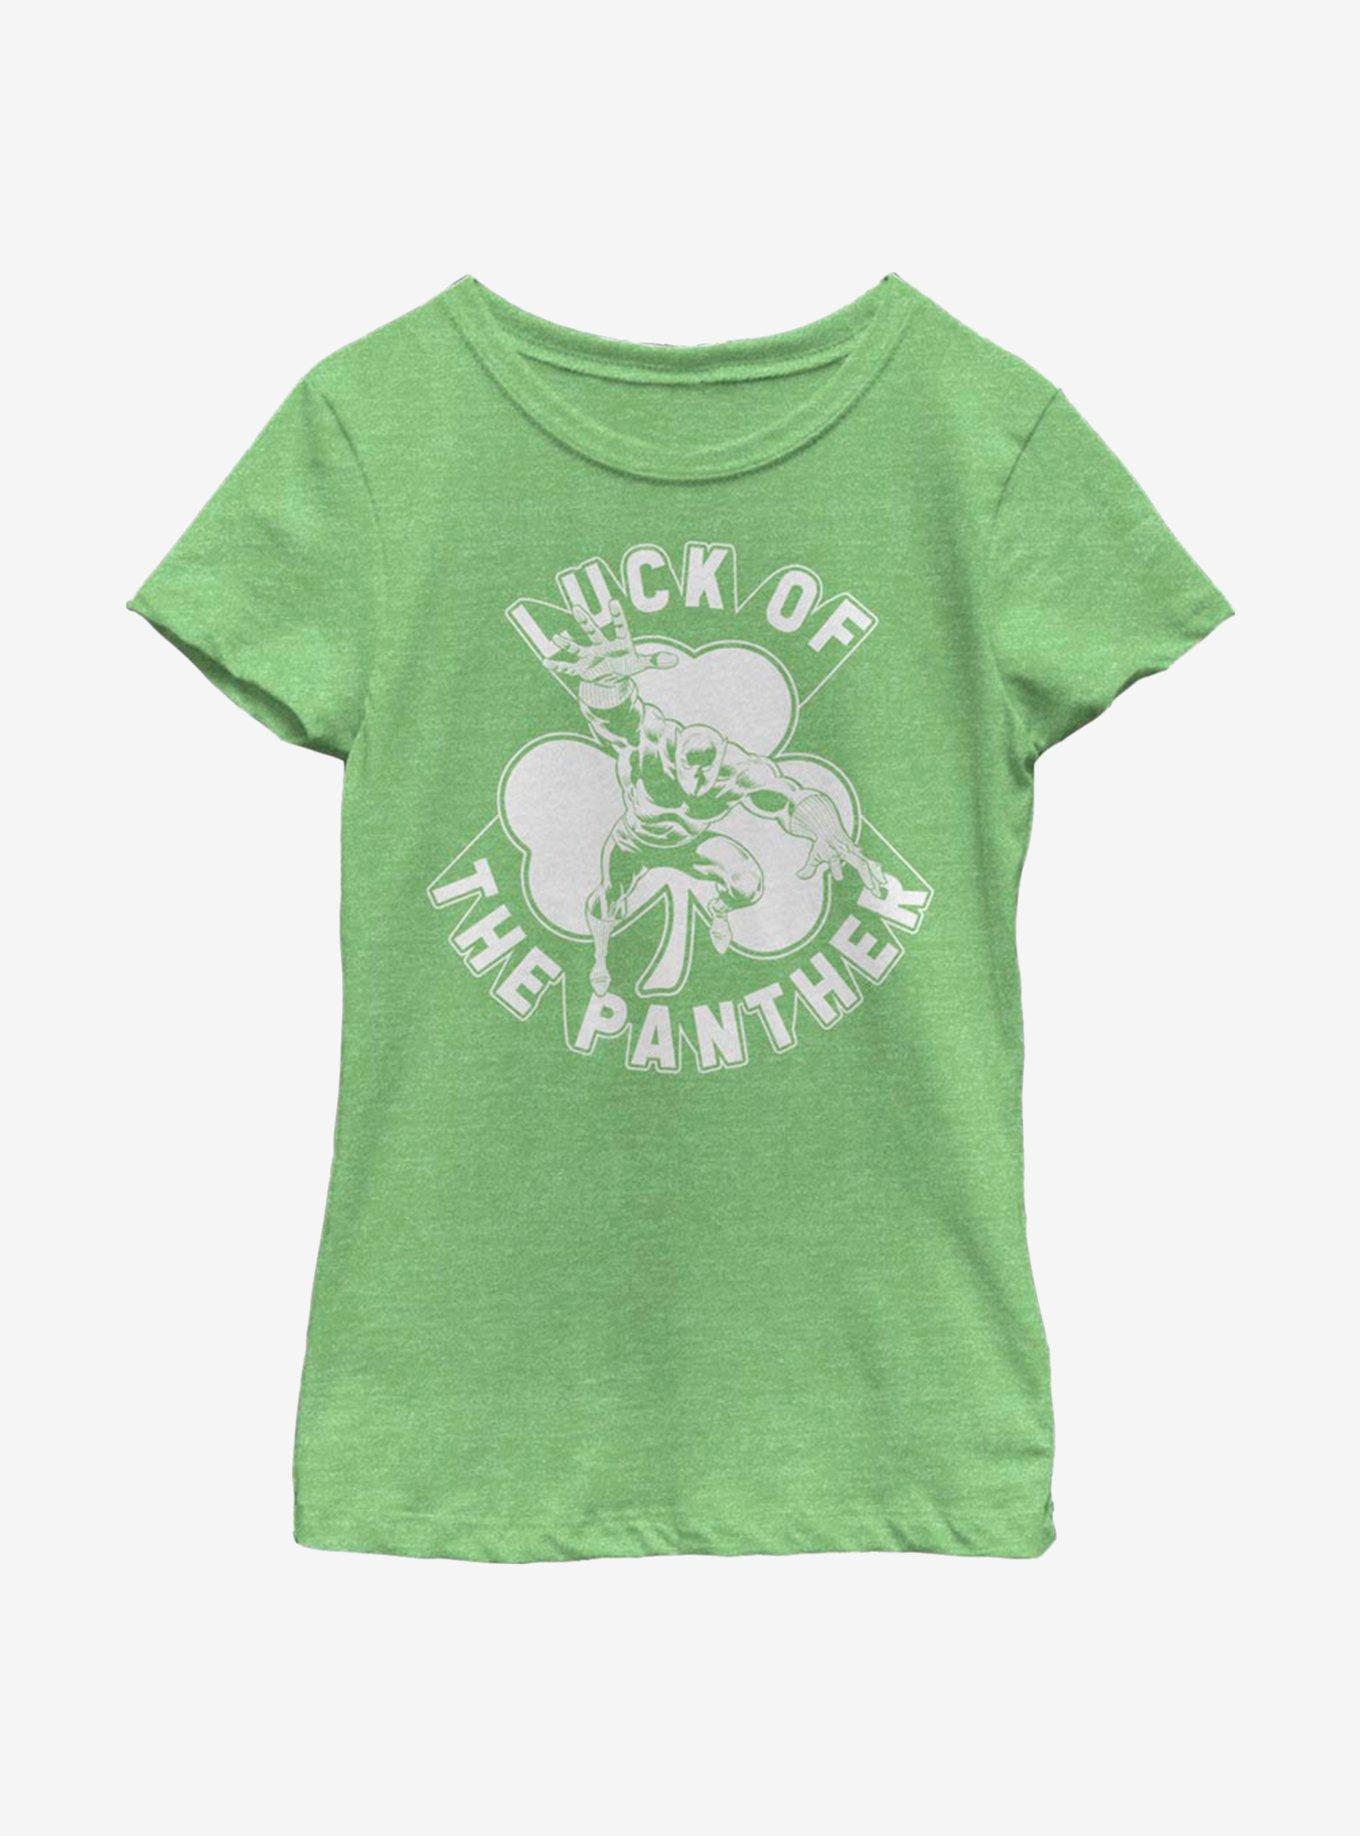 Marvel Black Panther Luck Of The Panther Youth Girls T-Shirt, , hi-res